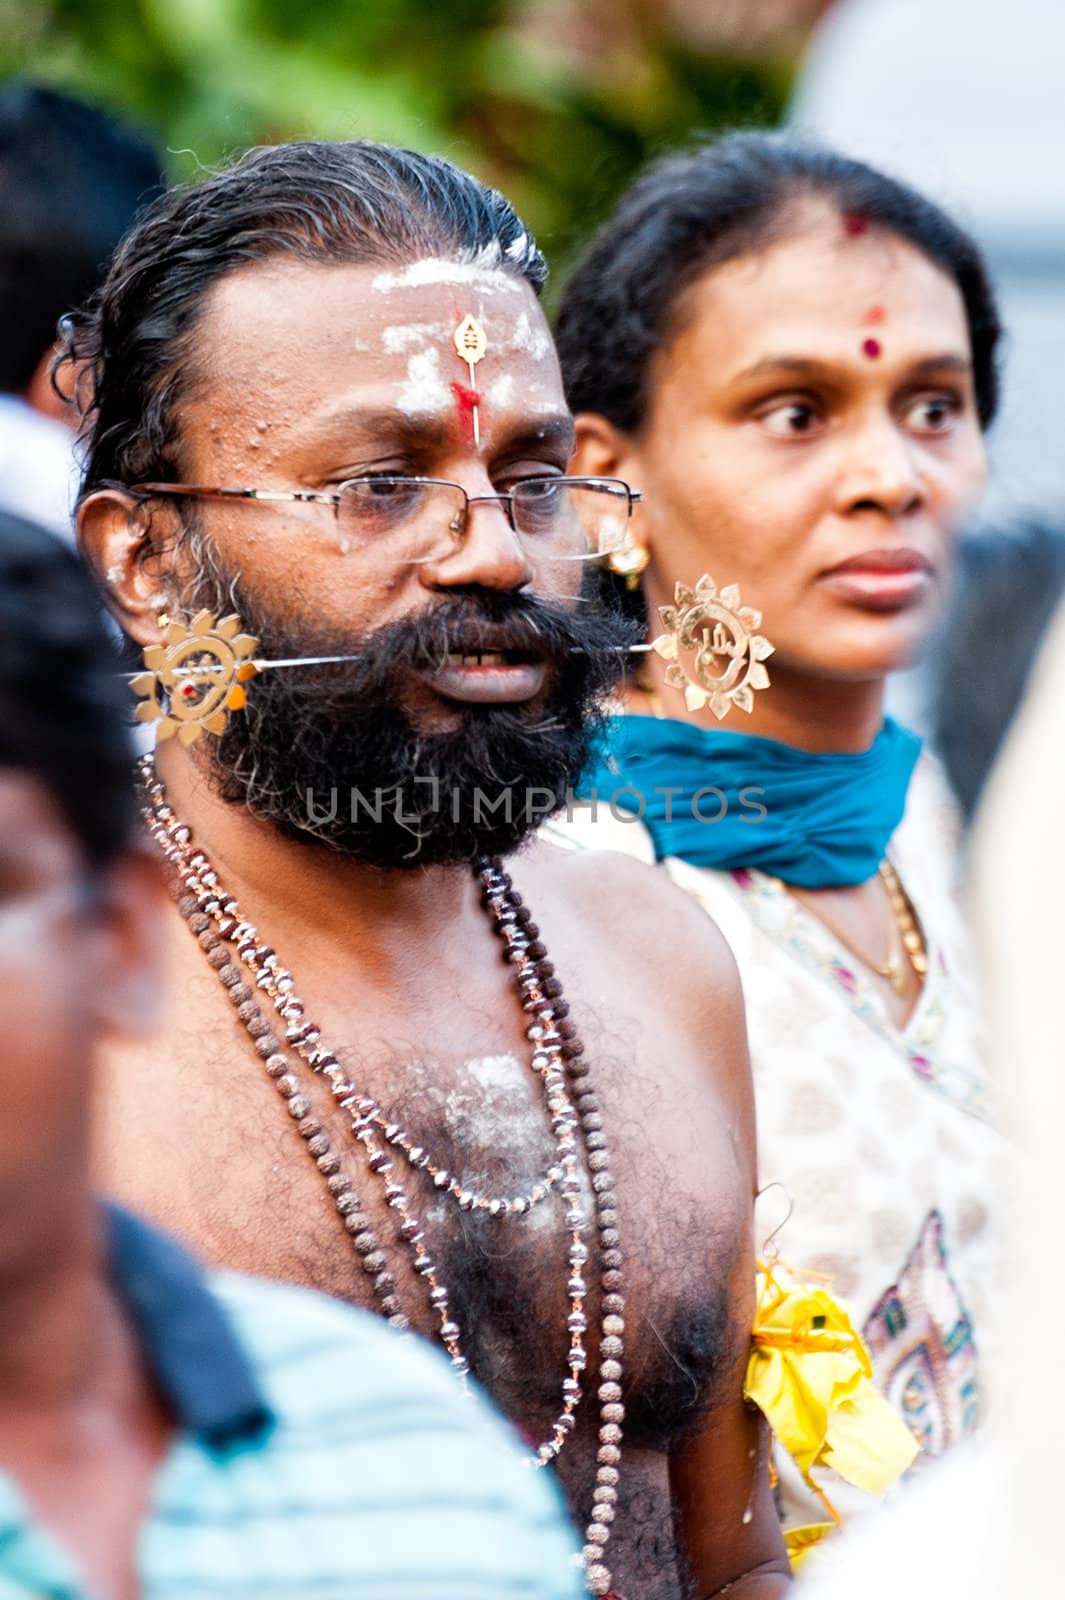 EDITORIAL USE ONLY!! SINGAPORE – 2013 JANUARY 27: Devotees at the annual Thaipusam processionin Singapore. Hindu festival to worship and to make offerings to the god Muruga.  2013 JANUARY 27